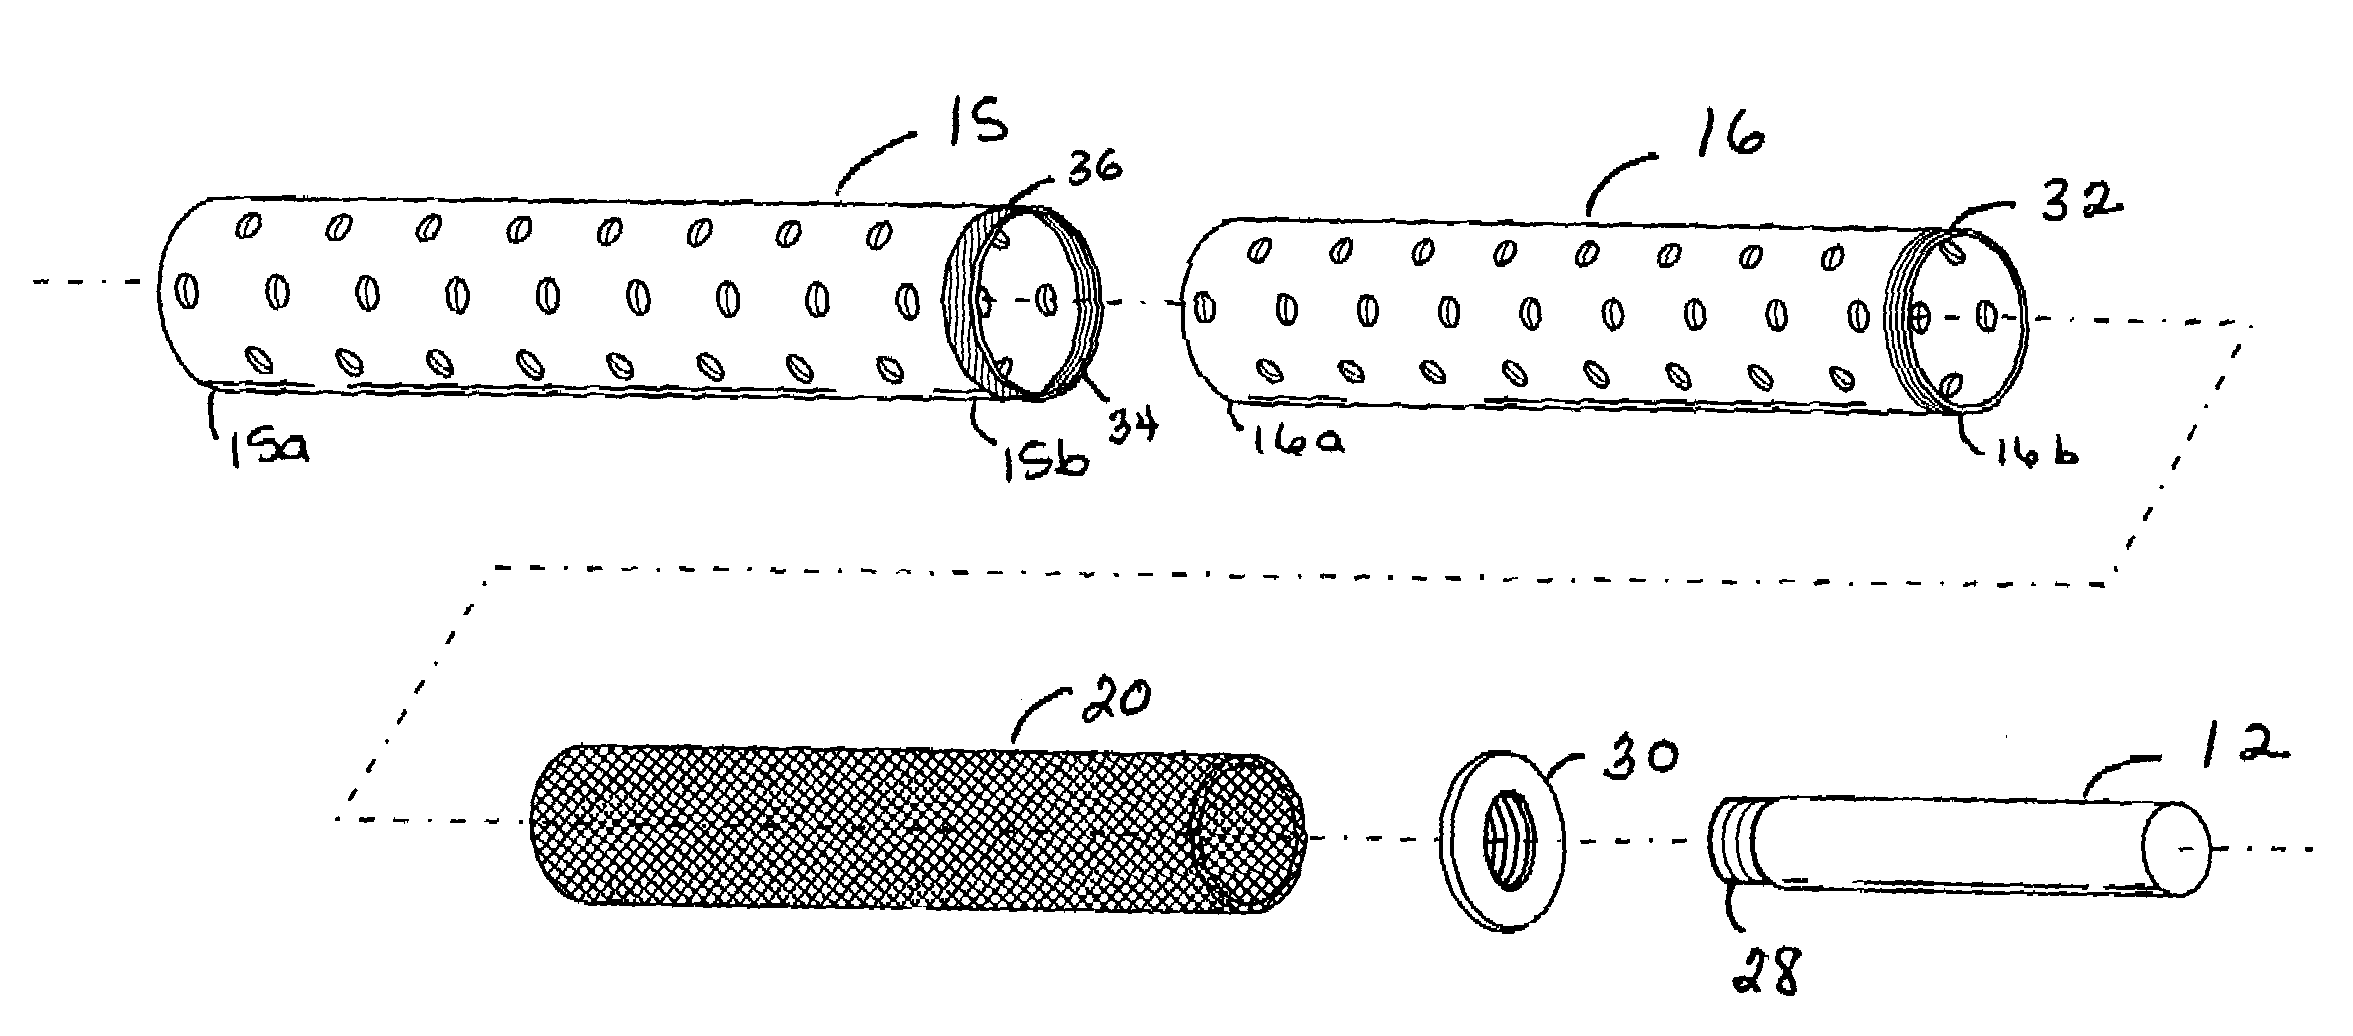 Surface treatment articles and methods